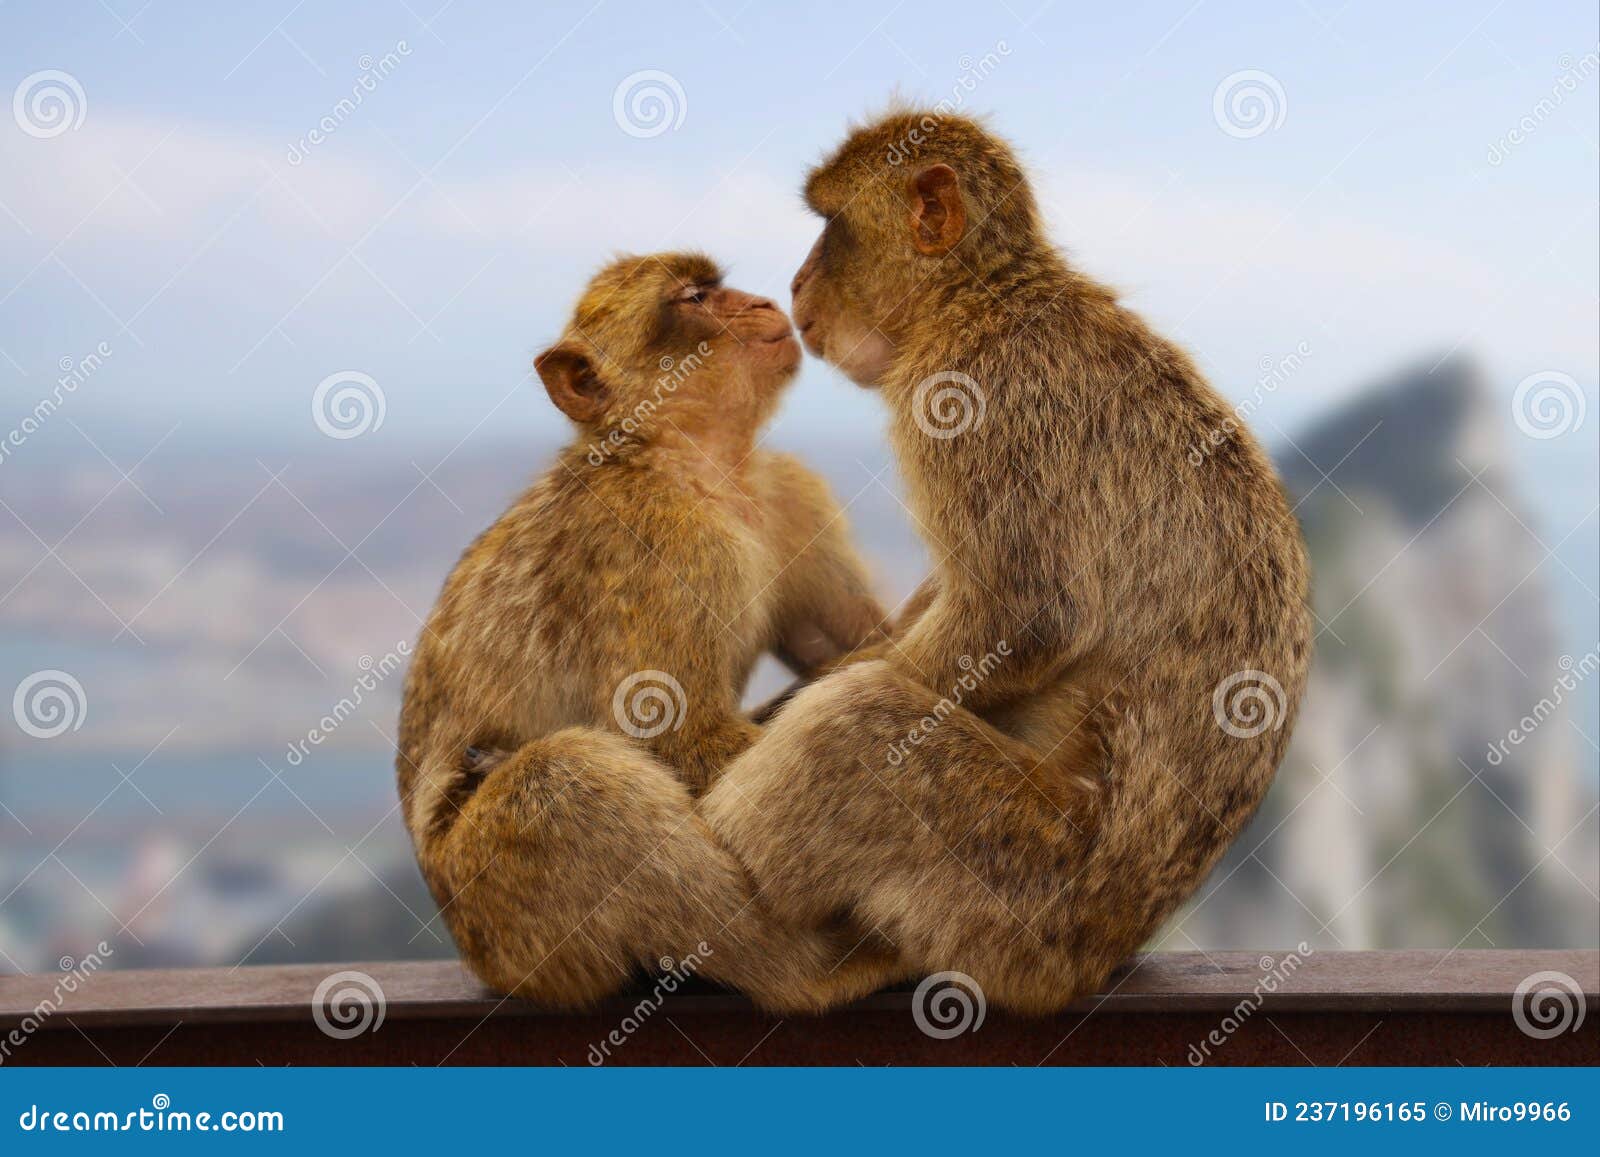 two macaque monkeys kissing on gibraltar